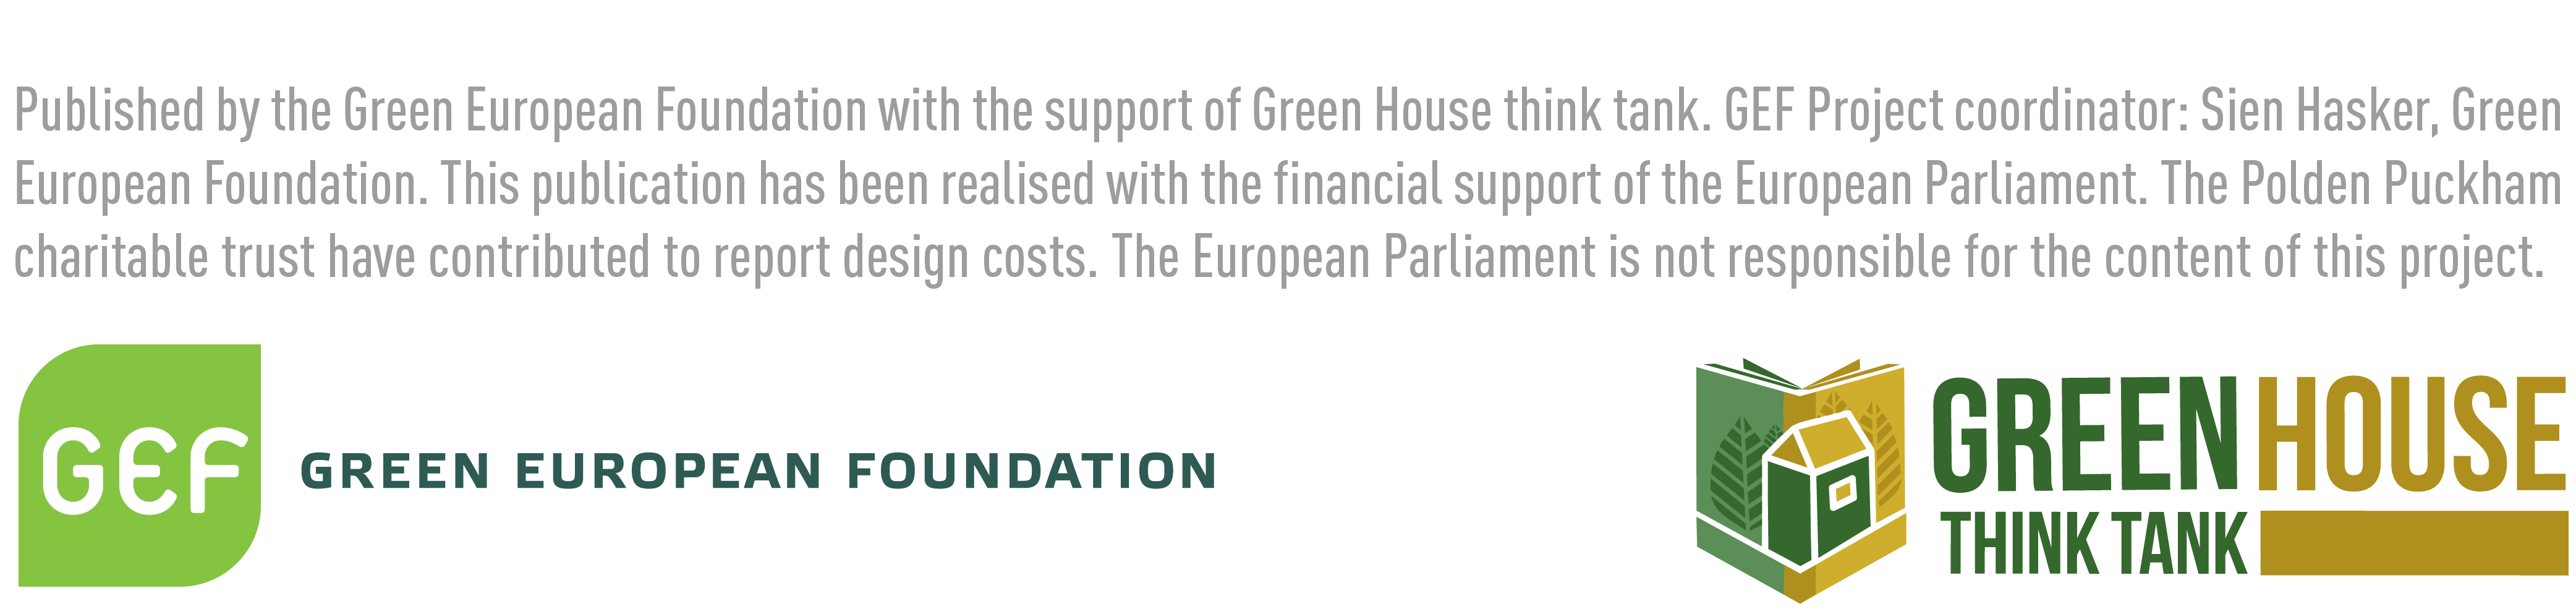 Image of the logos of the Green European Foundation and the Green House Think Tank logos with text that reads Published by the Green European Foundation with the support of Green House think tank. GEF project coordinator: Sian Hasker, Green European Foundation. This publication has been realised with financial support of the European parliament. The Polden Puckham charitable trust have contributed to the report design costs. The European Parliament is not responsible for the content of this project.